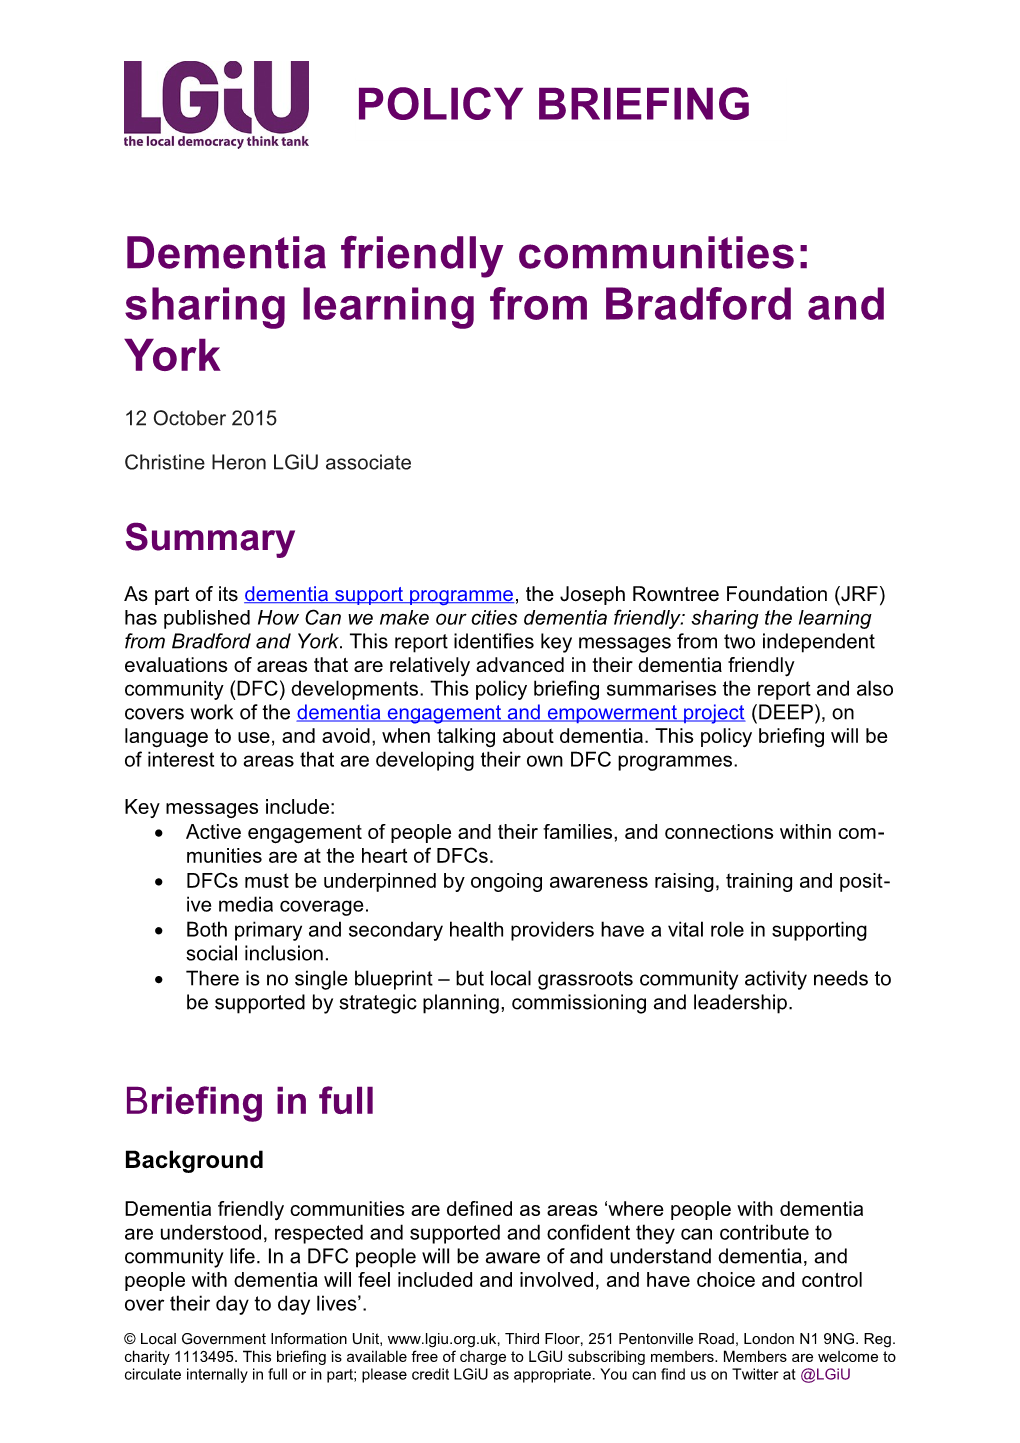 Dementia Friendly Communities: Sharing Learning from Bradford and York